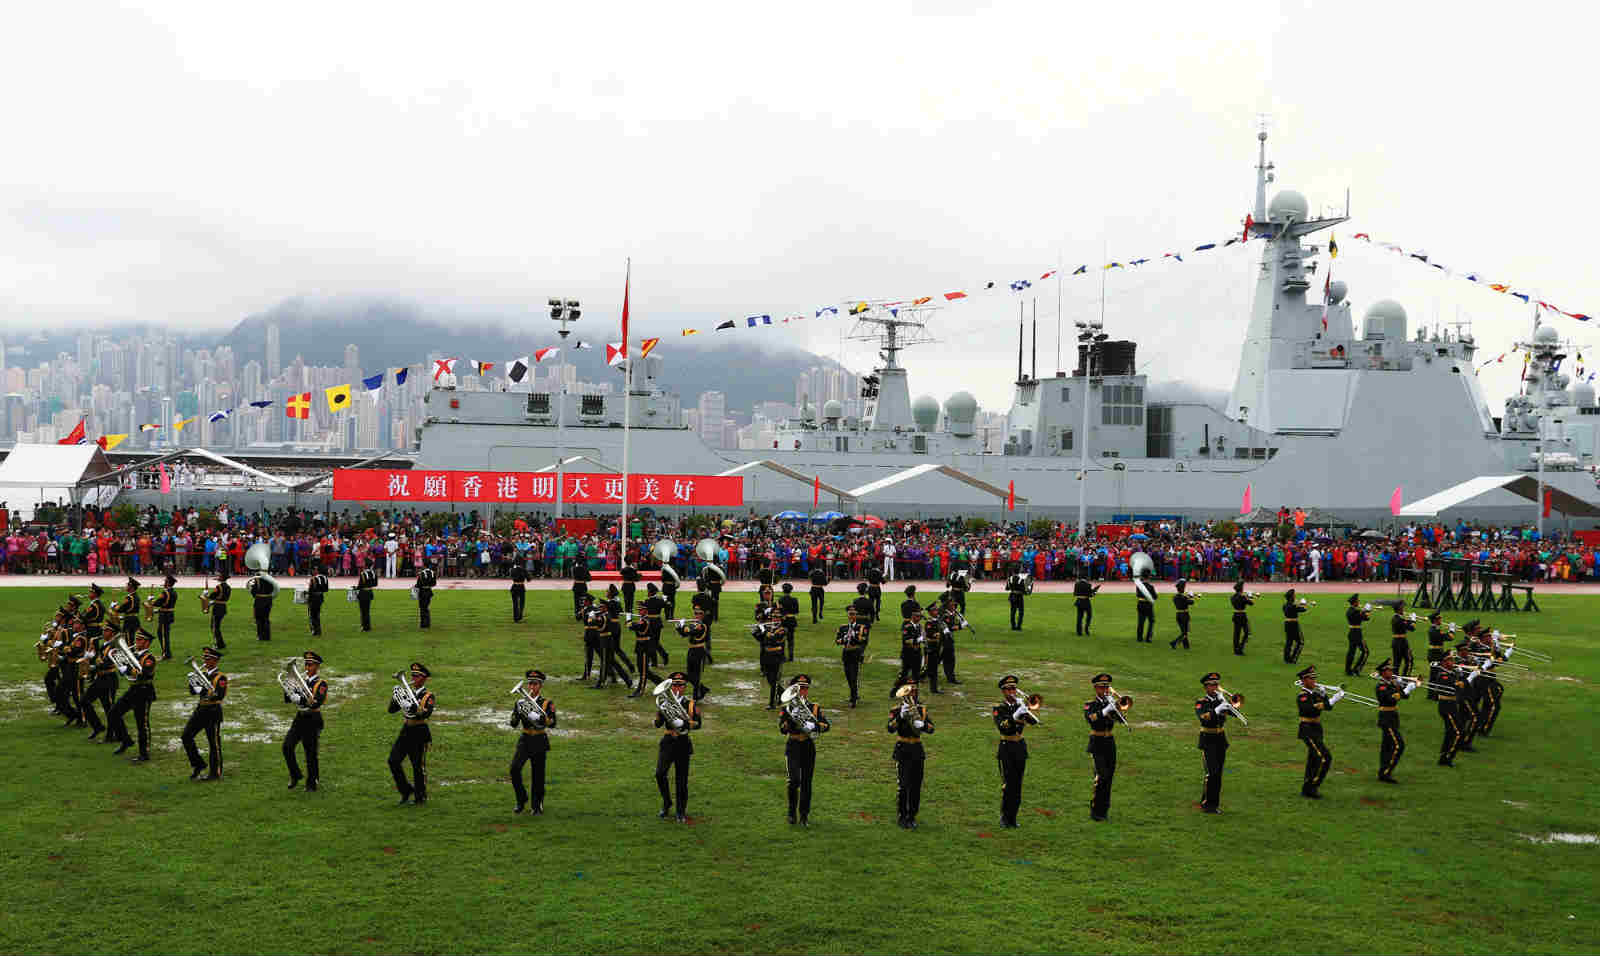 The military band performs for visitors in the Ngong Shuen Chau Barracks of the PLA Hong Kong Garrison on the camp-open day in the Ngong Shuen Chau Barracks. In order to celebrate the 20th anniversary of Hong Kong's return to the motherland, the Ngong Shuen Chau Barracks of the PLA Hong Kong Garrison held the camp-open day activities on the morning of July 8, 2017. (eng.chinamil.com.cn/Photo by Zhou Hanqing)